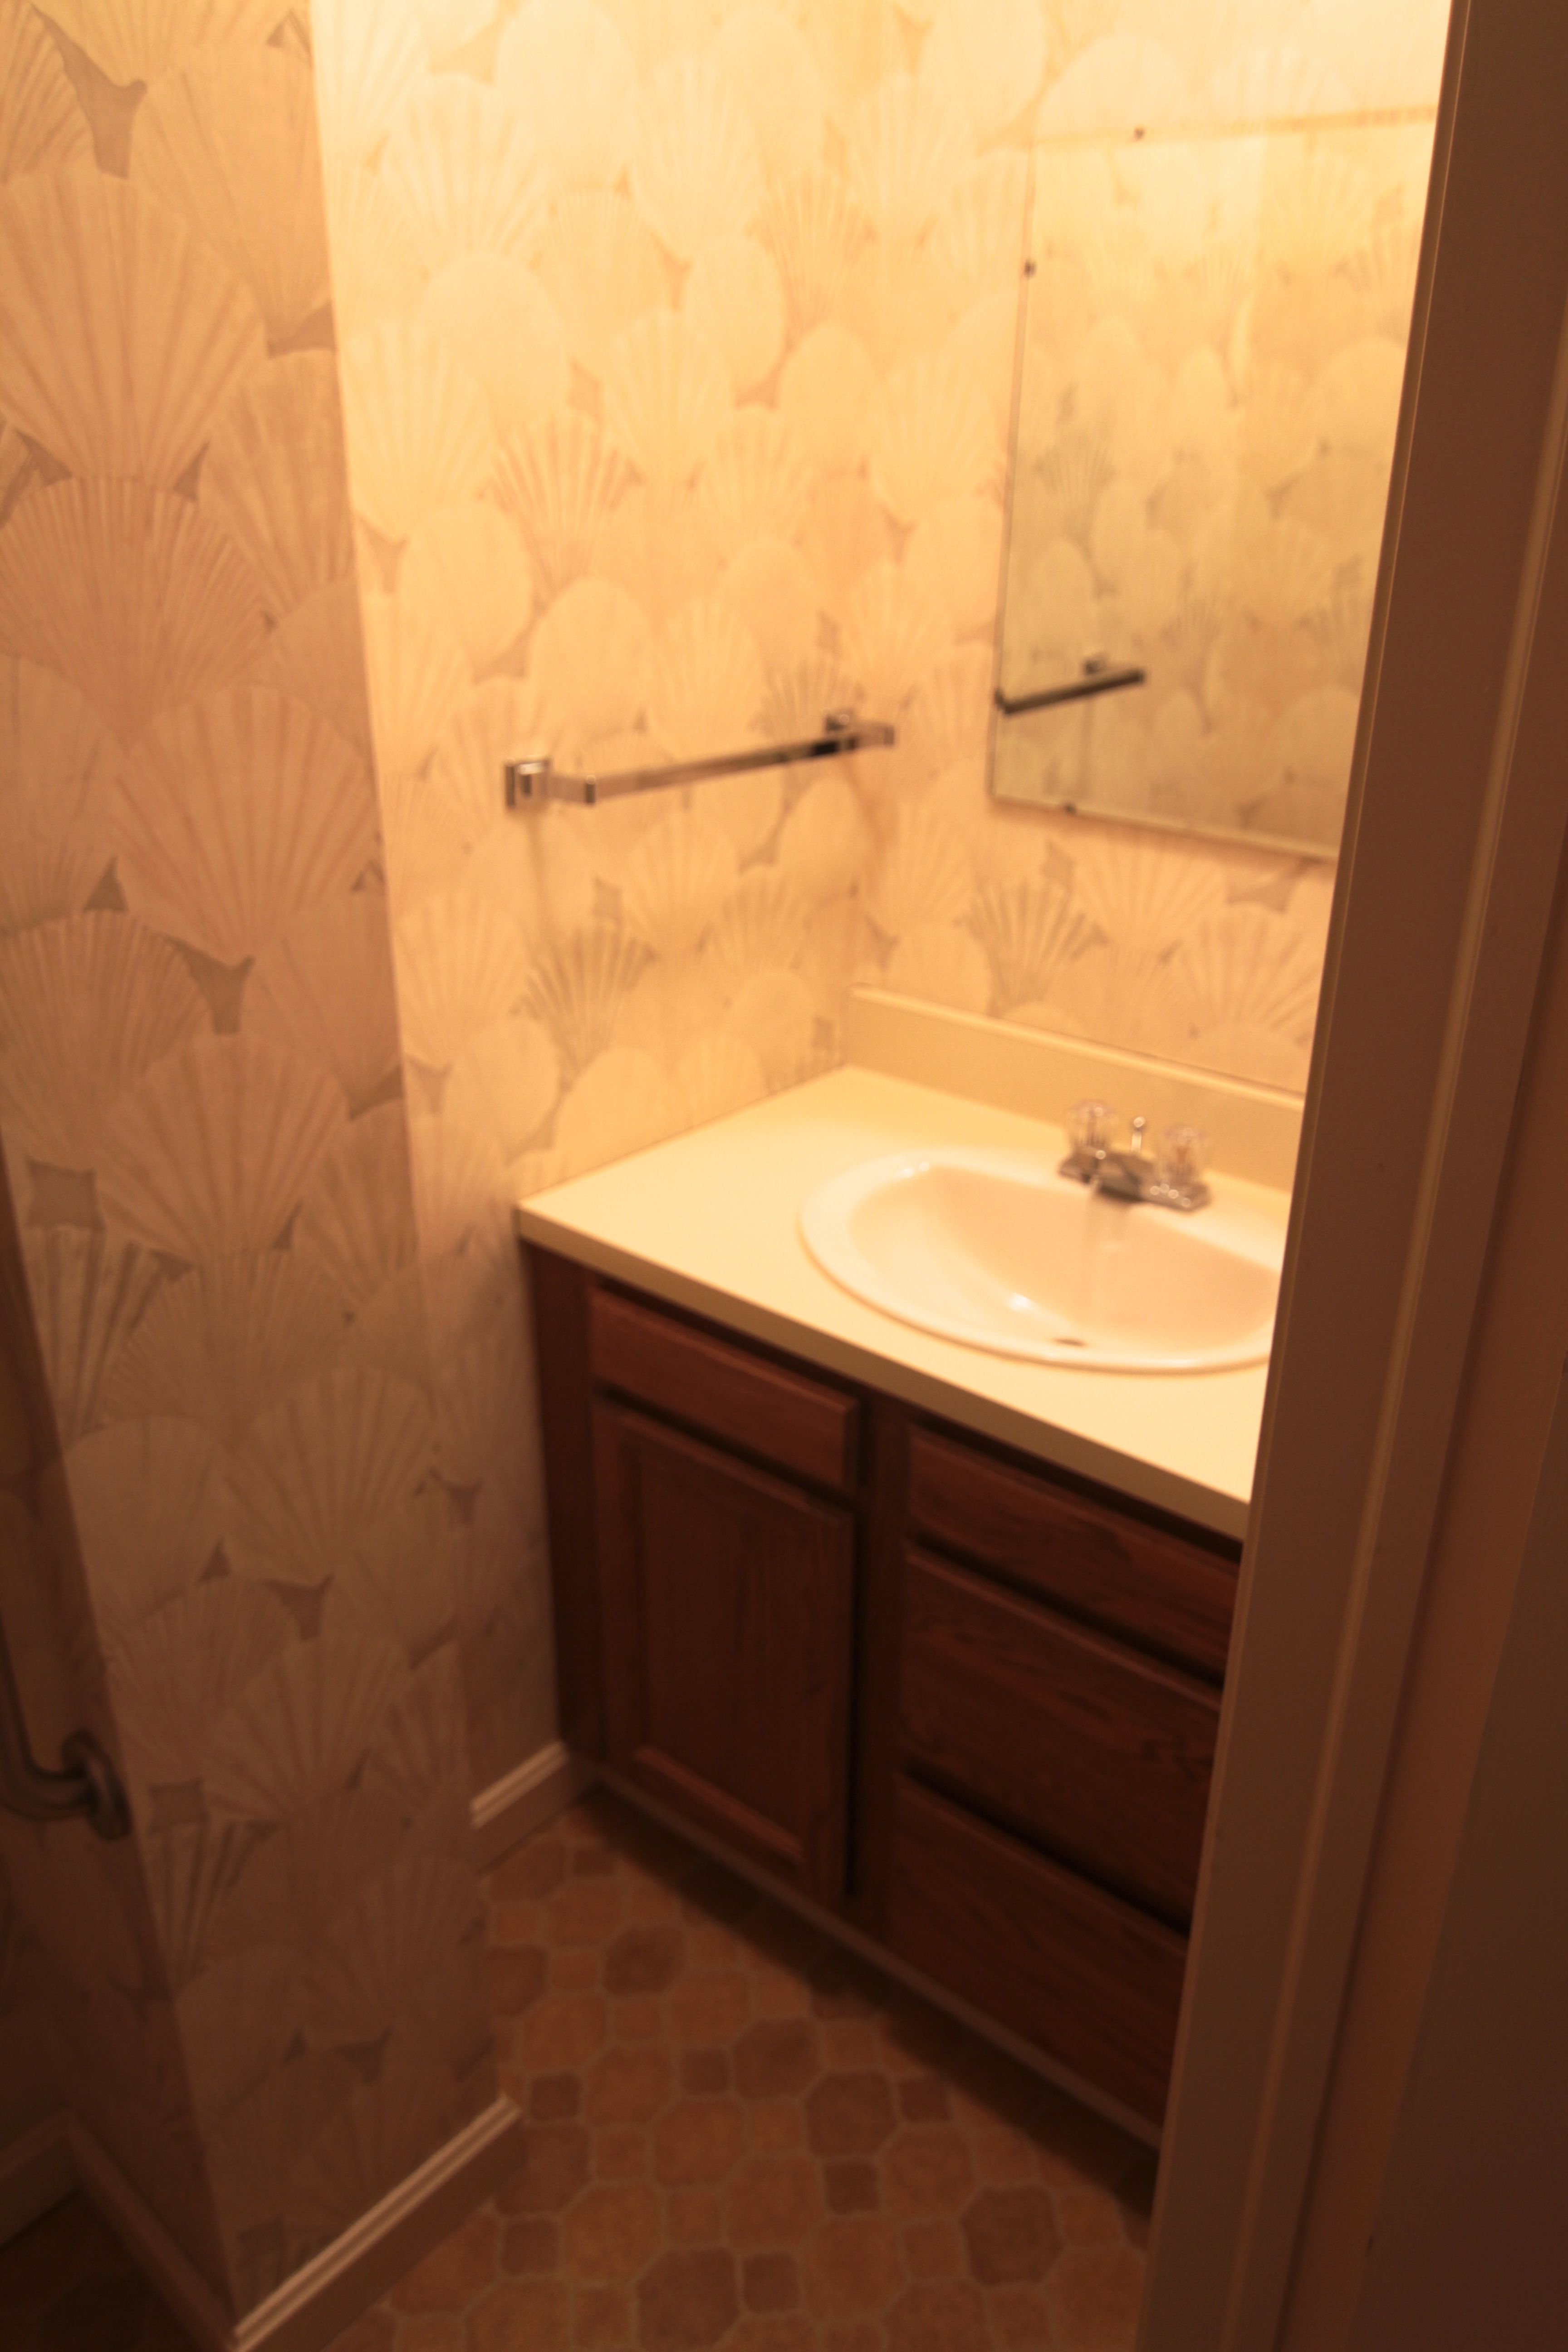 BEFORE: This powder room is basic, but it needn't be so ugly.